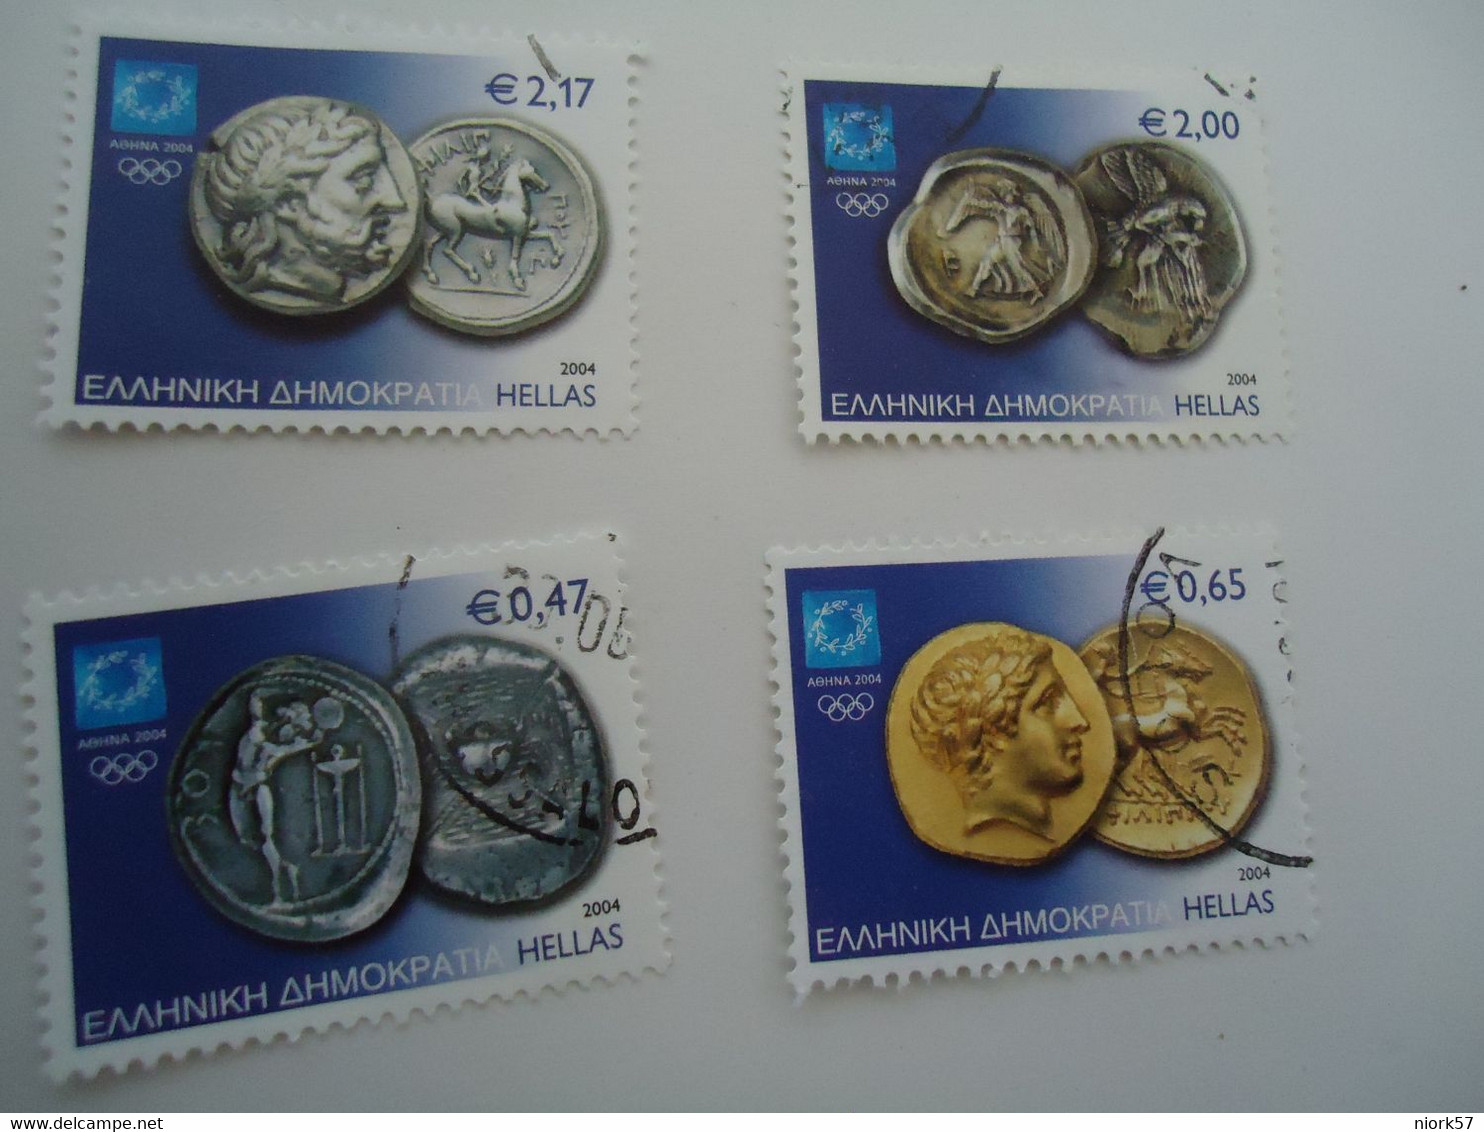 GREECE USED STAMPS  SET  2004 OLYMPIC GAMES  ATHENS   COINS ATHLETES - Sommer 2004: Athen - Paralympics